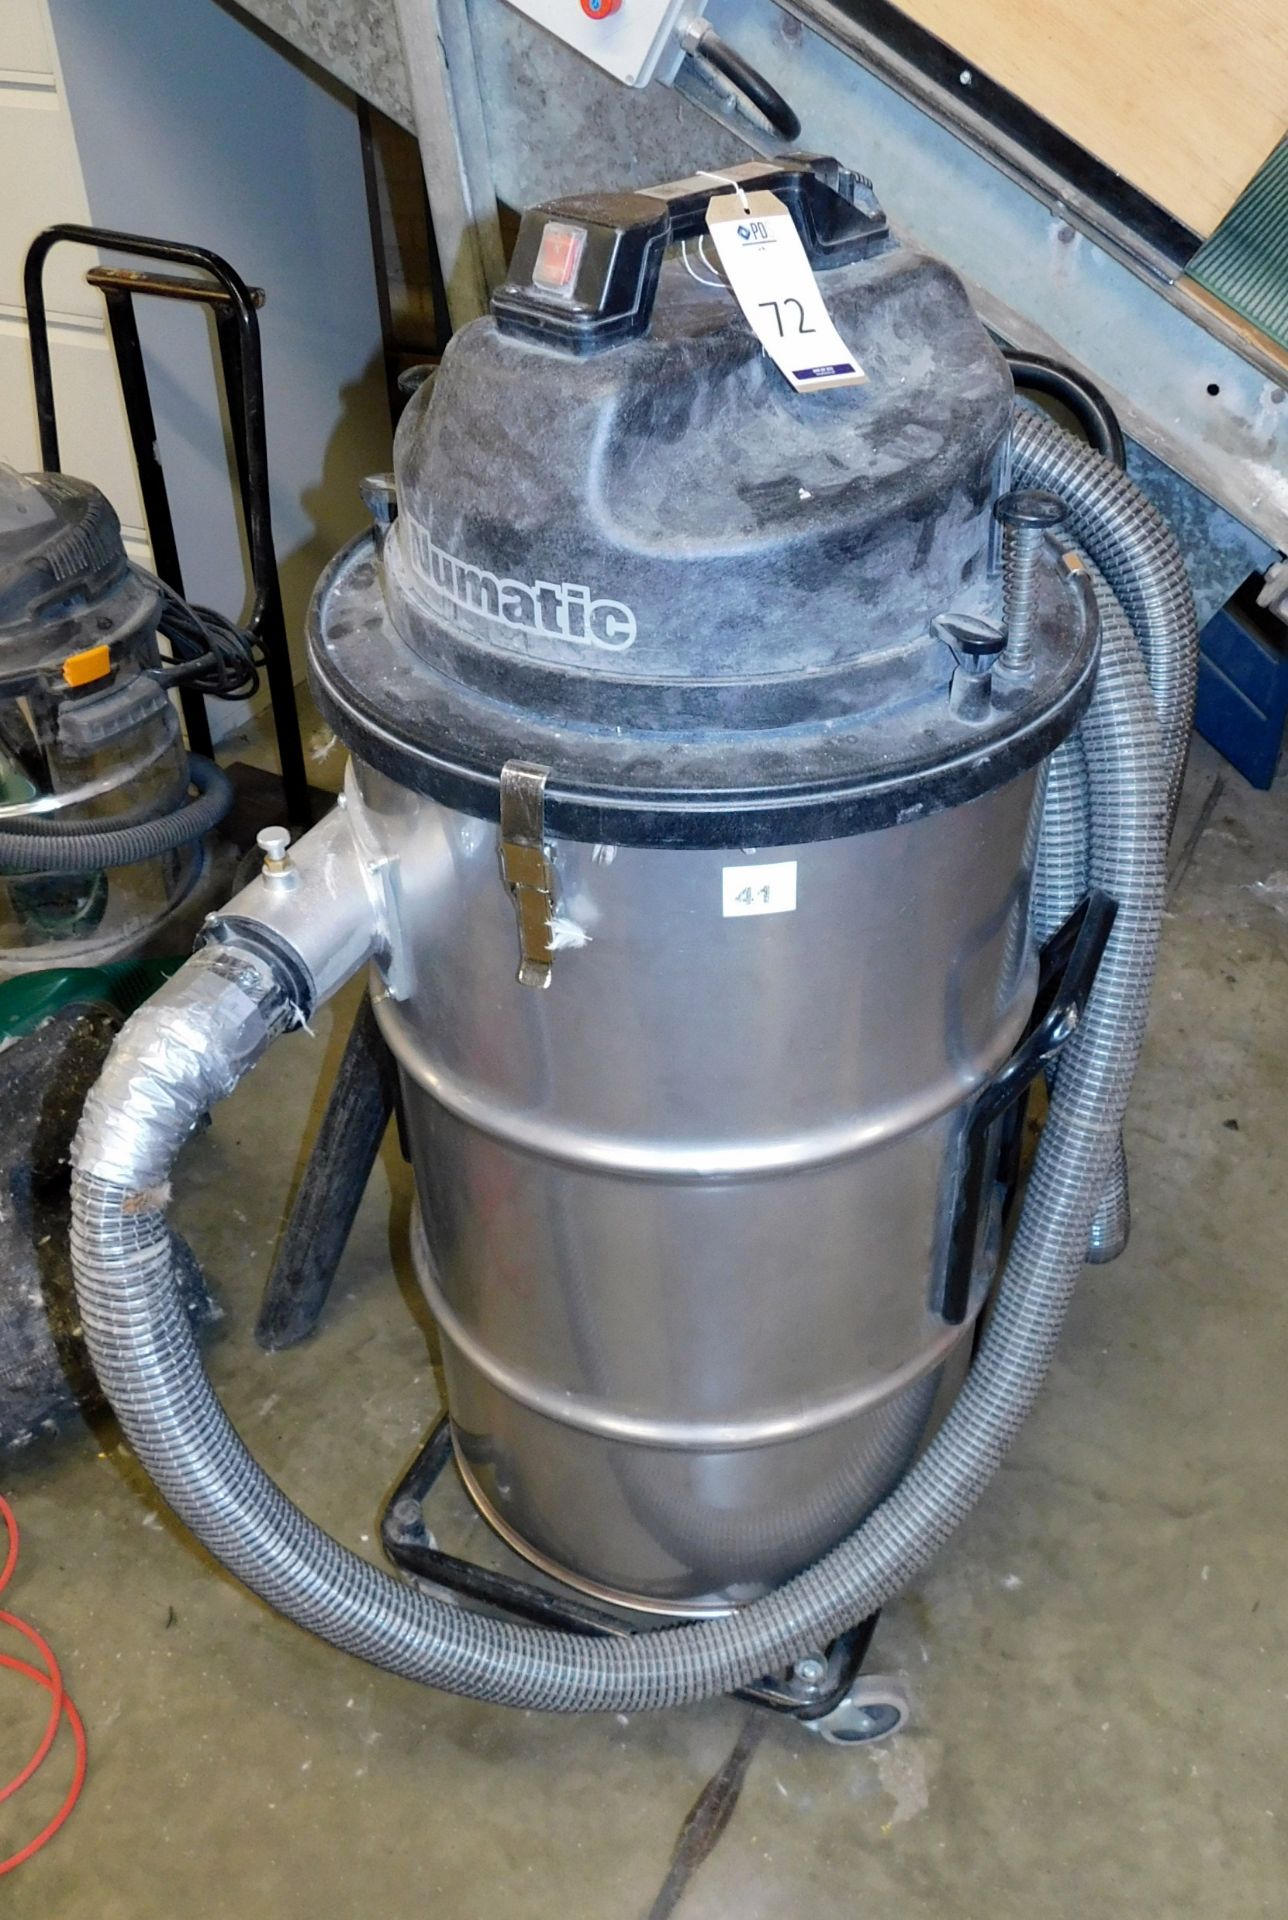 Numatic NTD2003 Industrial Vacuum Cleaner (Location Diss. Please Refer to General Notes)